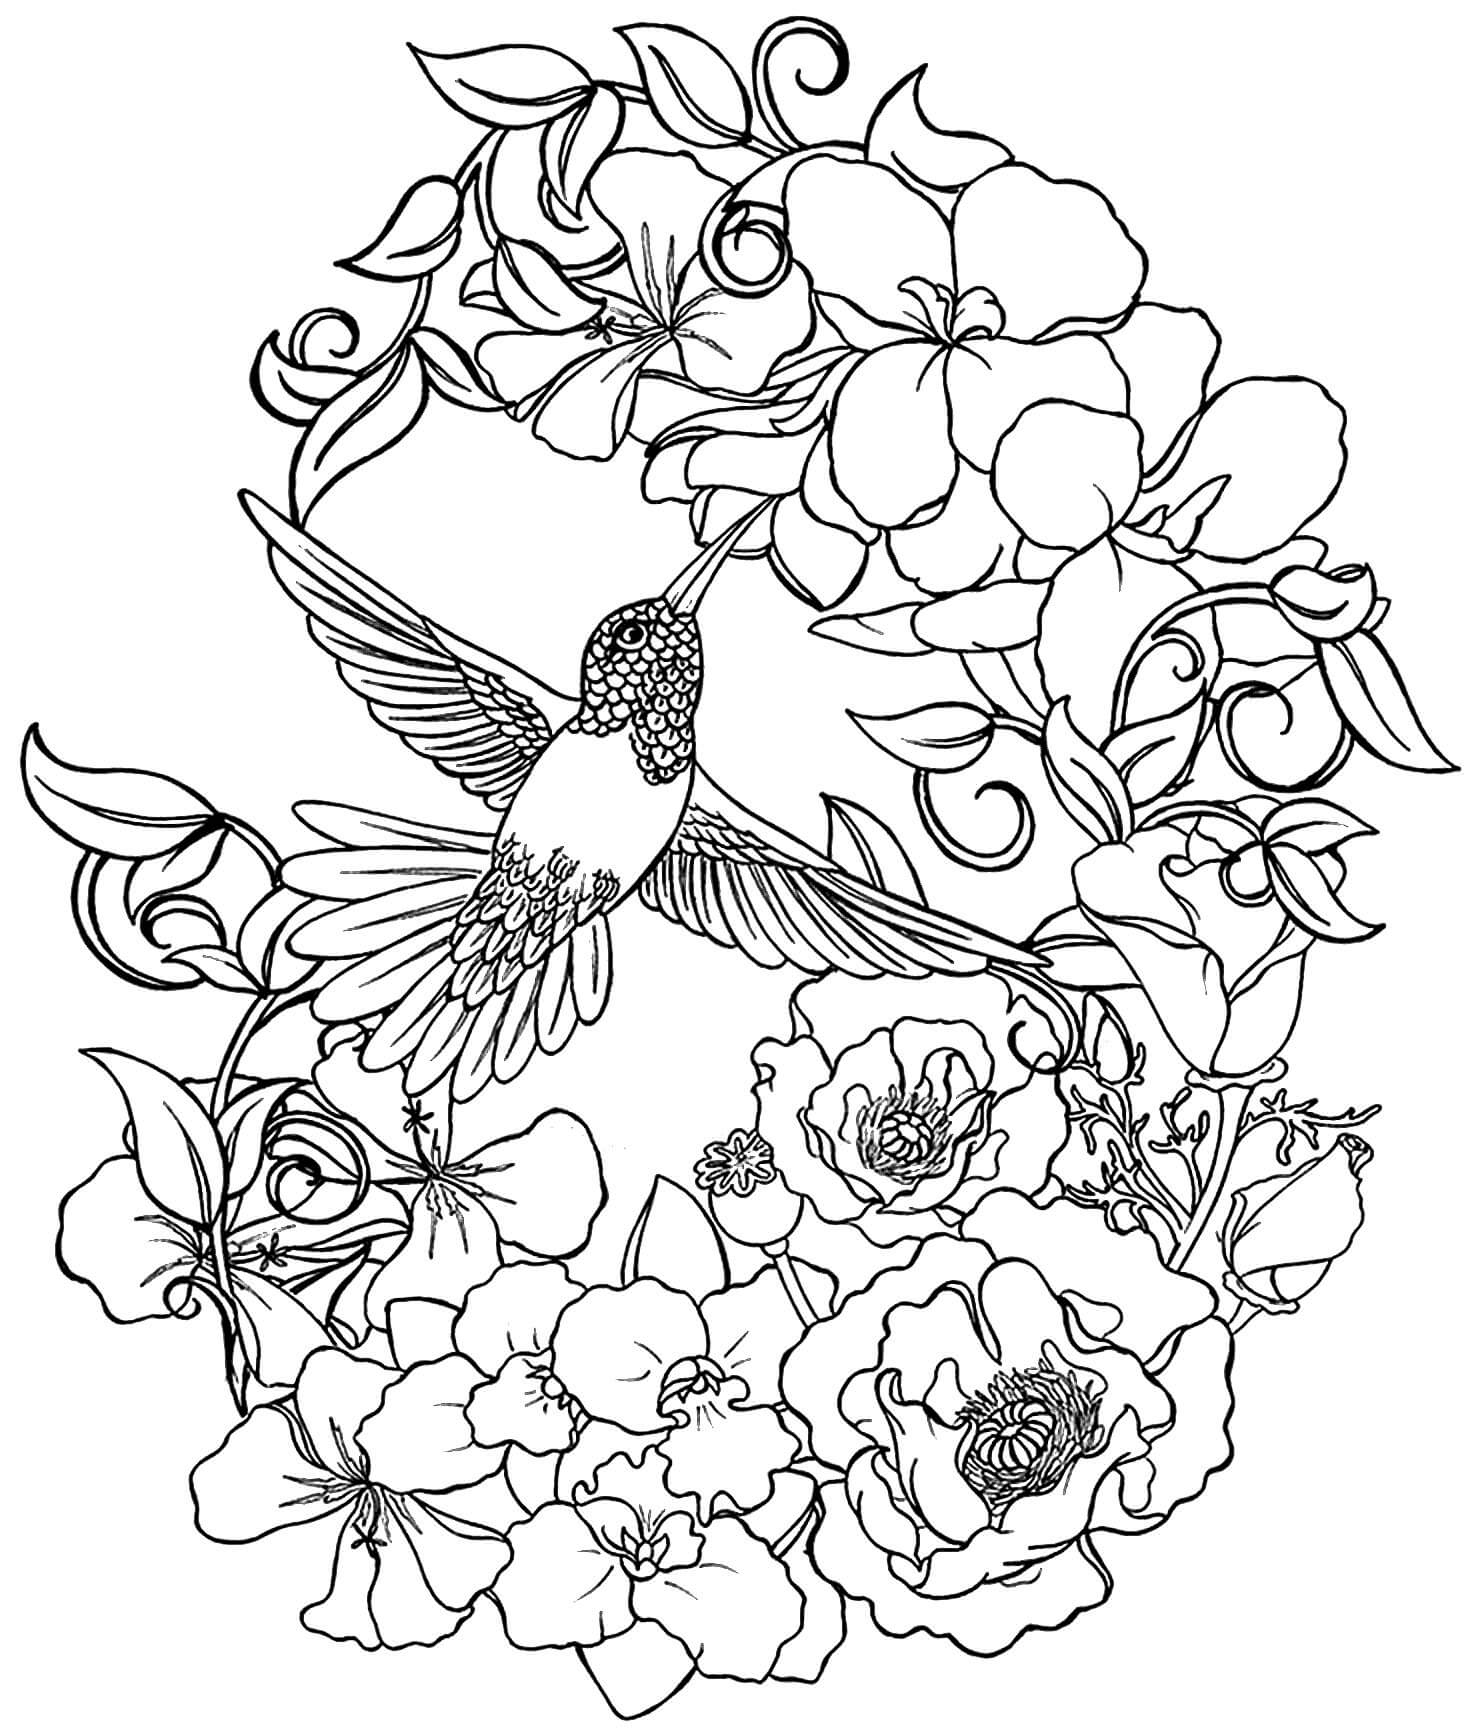 Hummingbird and Flowers Coloring Pages